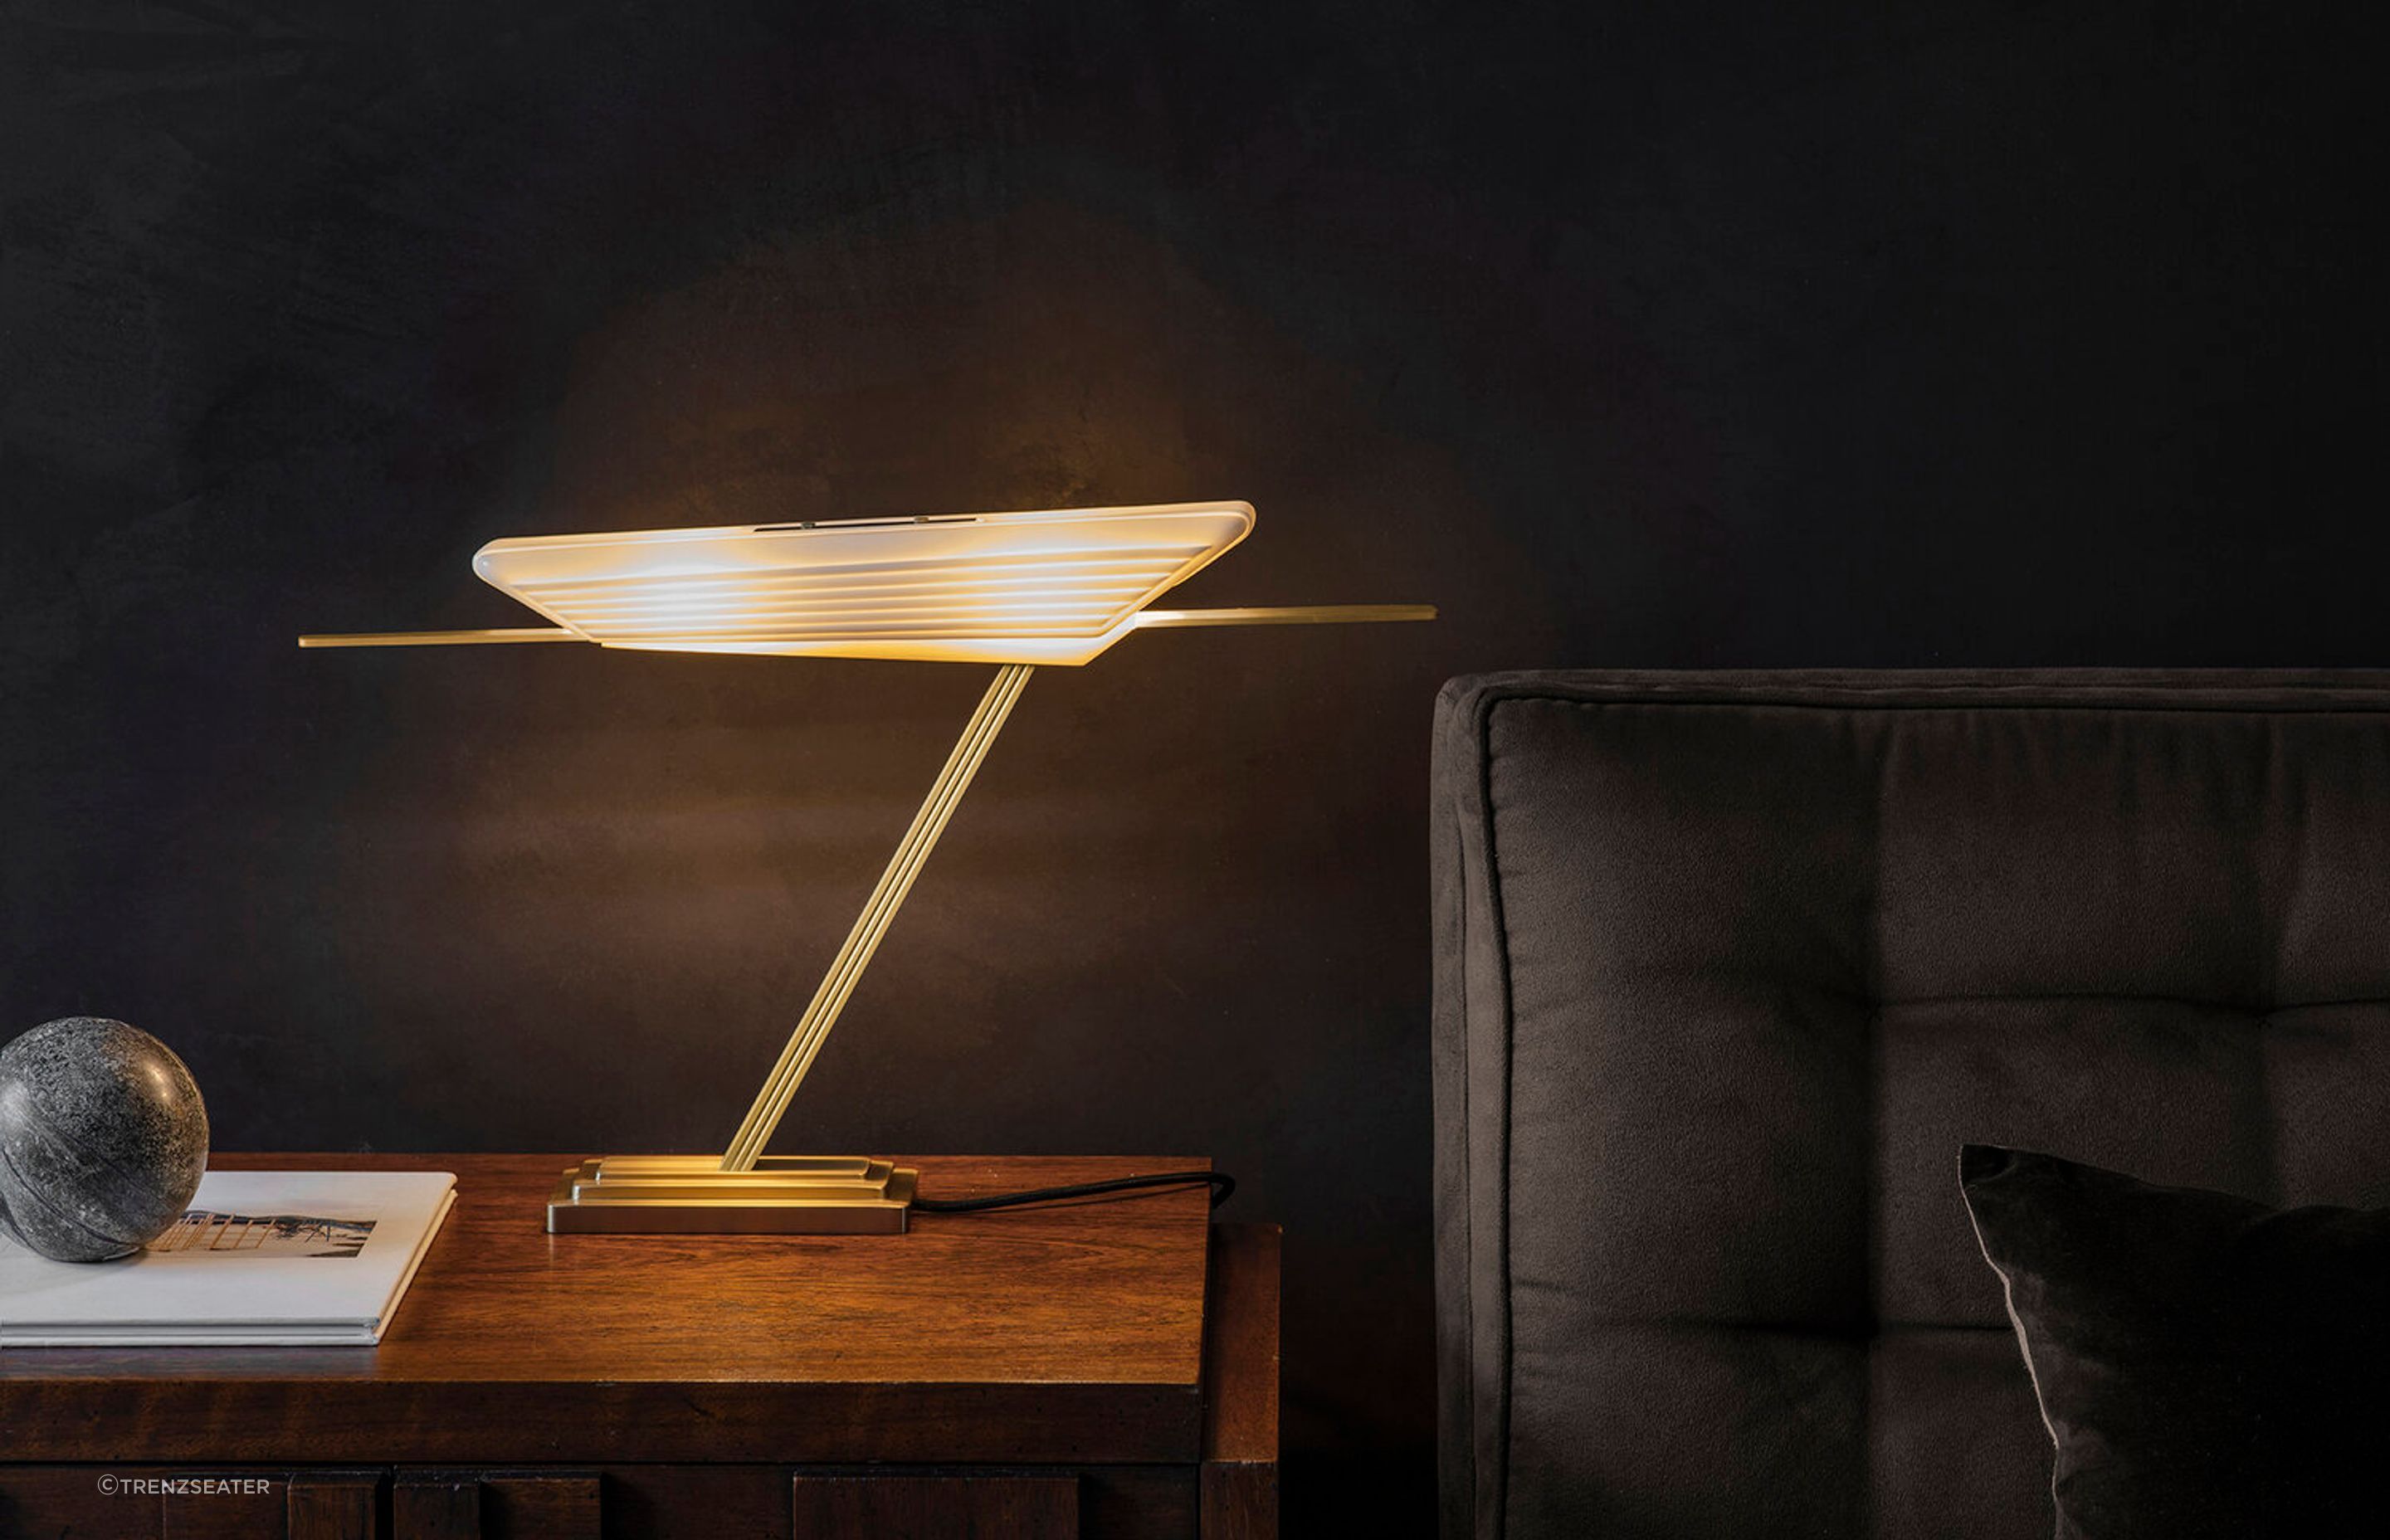 The Glaive Table Lamp epitomises style and functionality with respect to lighting.